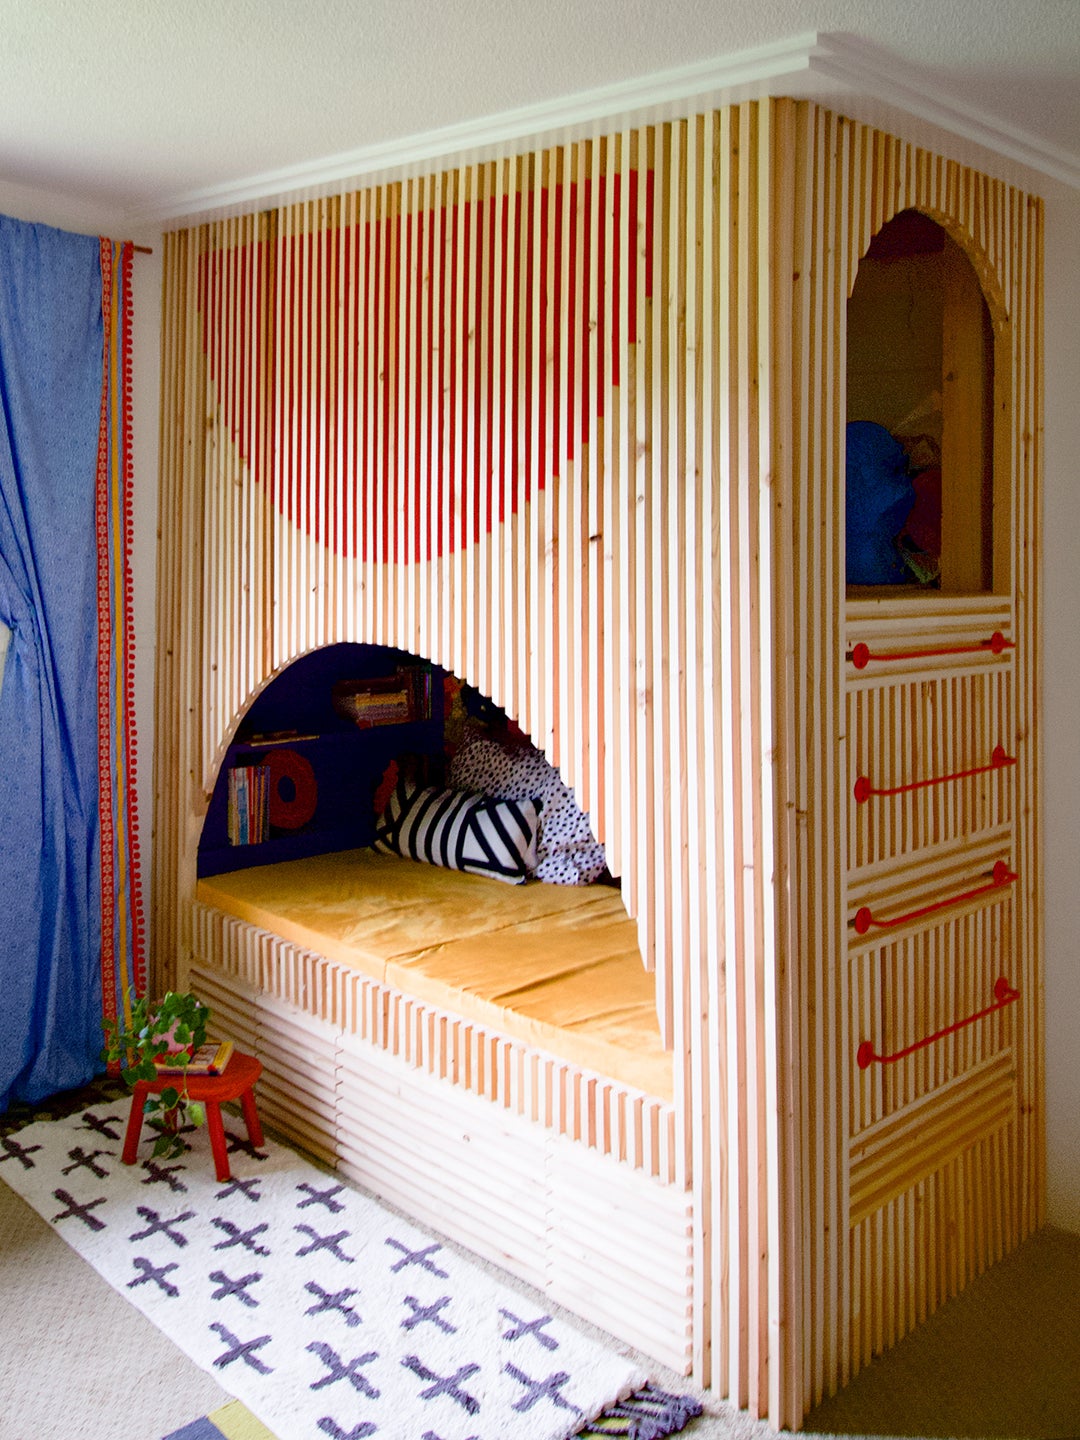 A Murphy Bed Unlocked Space for a Wide-Open Play Area in This Kids' Room